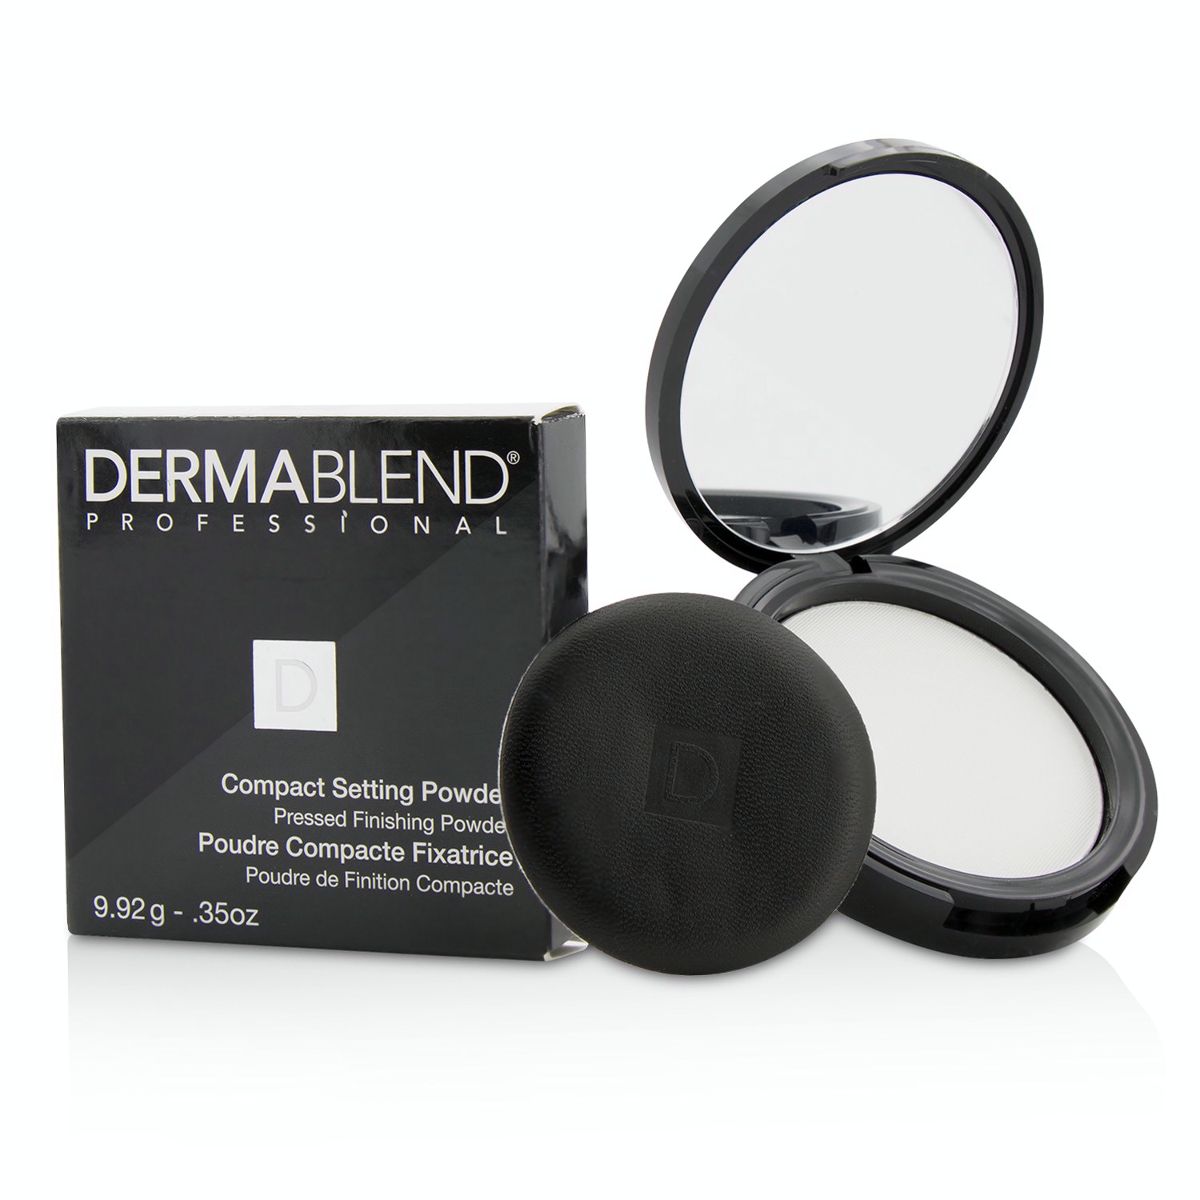 Compact Setting Powder (Pressed Finishing Powder) Dermablend Image